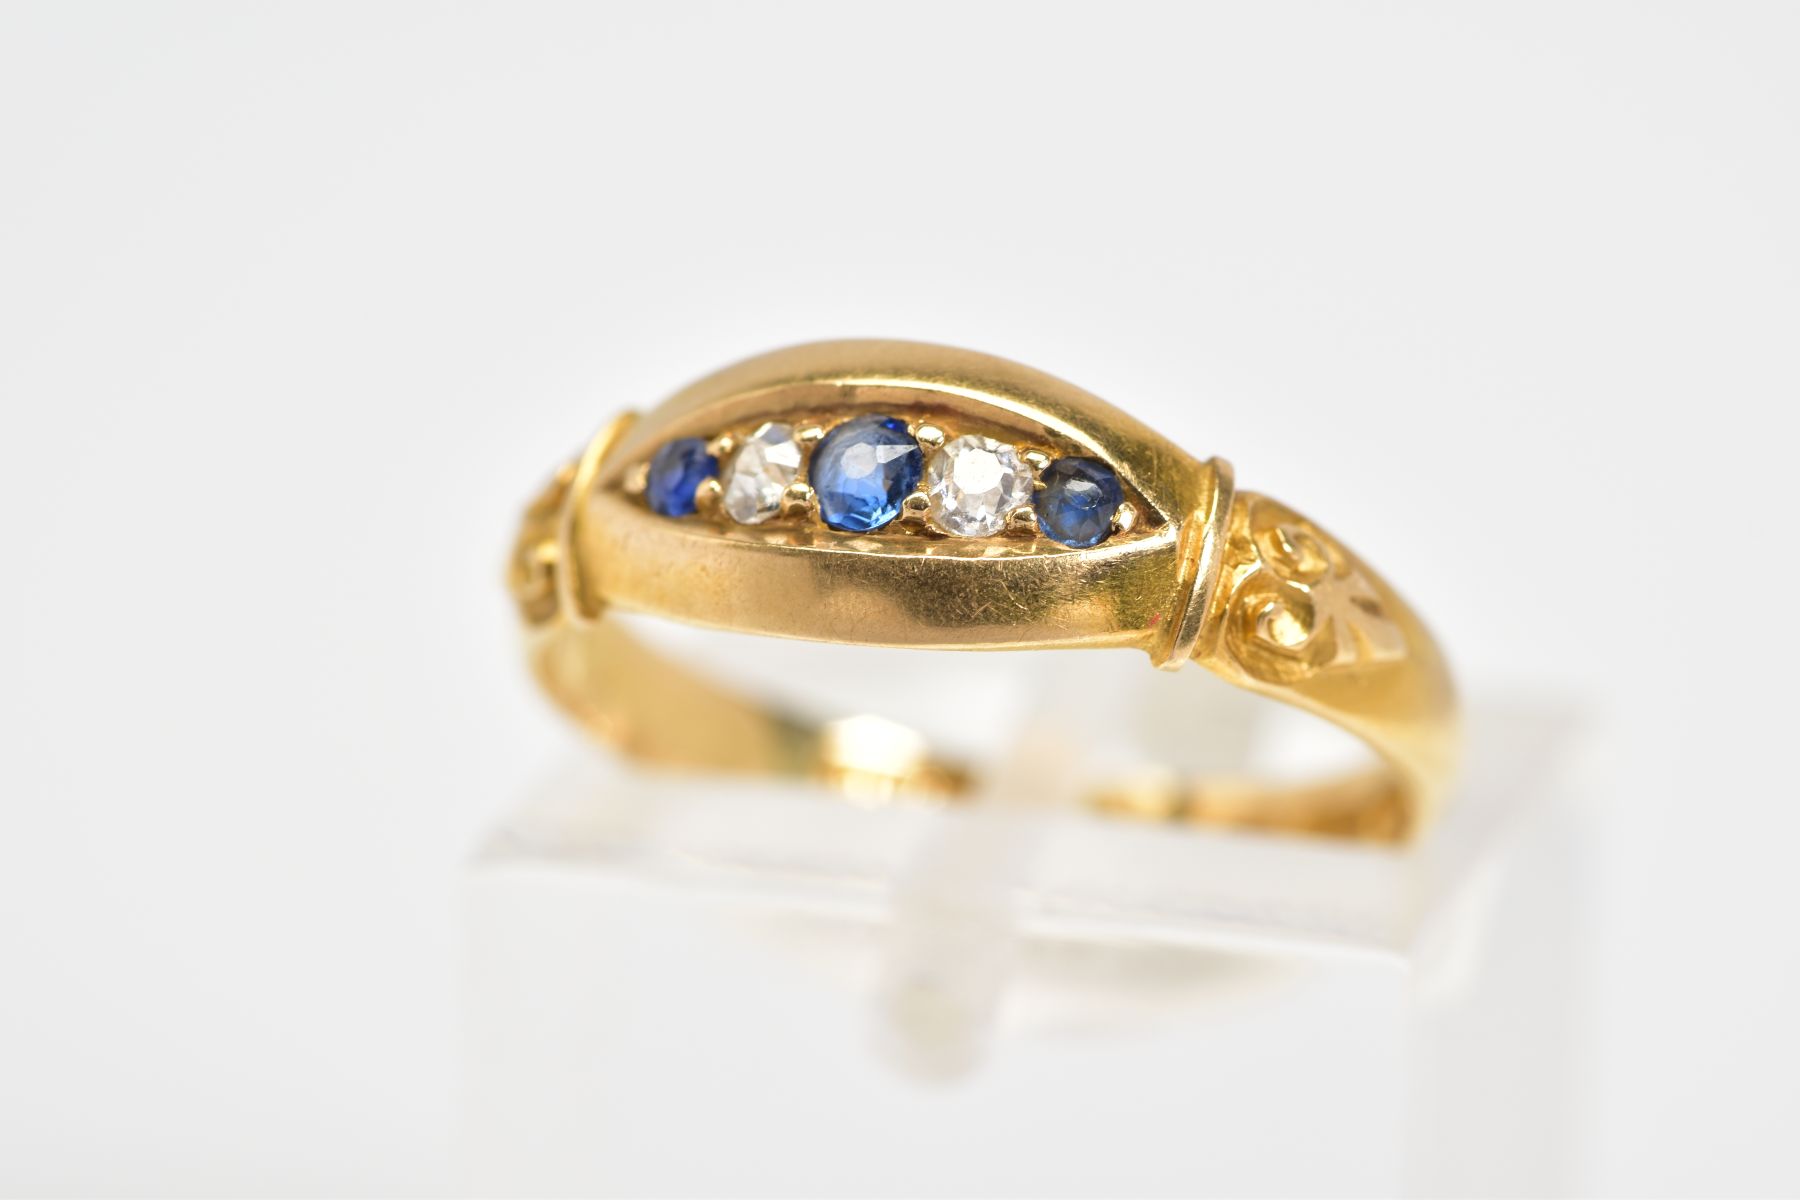 AN EARLY 20TH CENTURY FIVE STONE RING, set with three circular cut sapphires interspaced by two